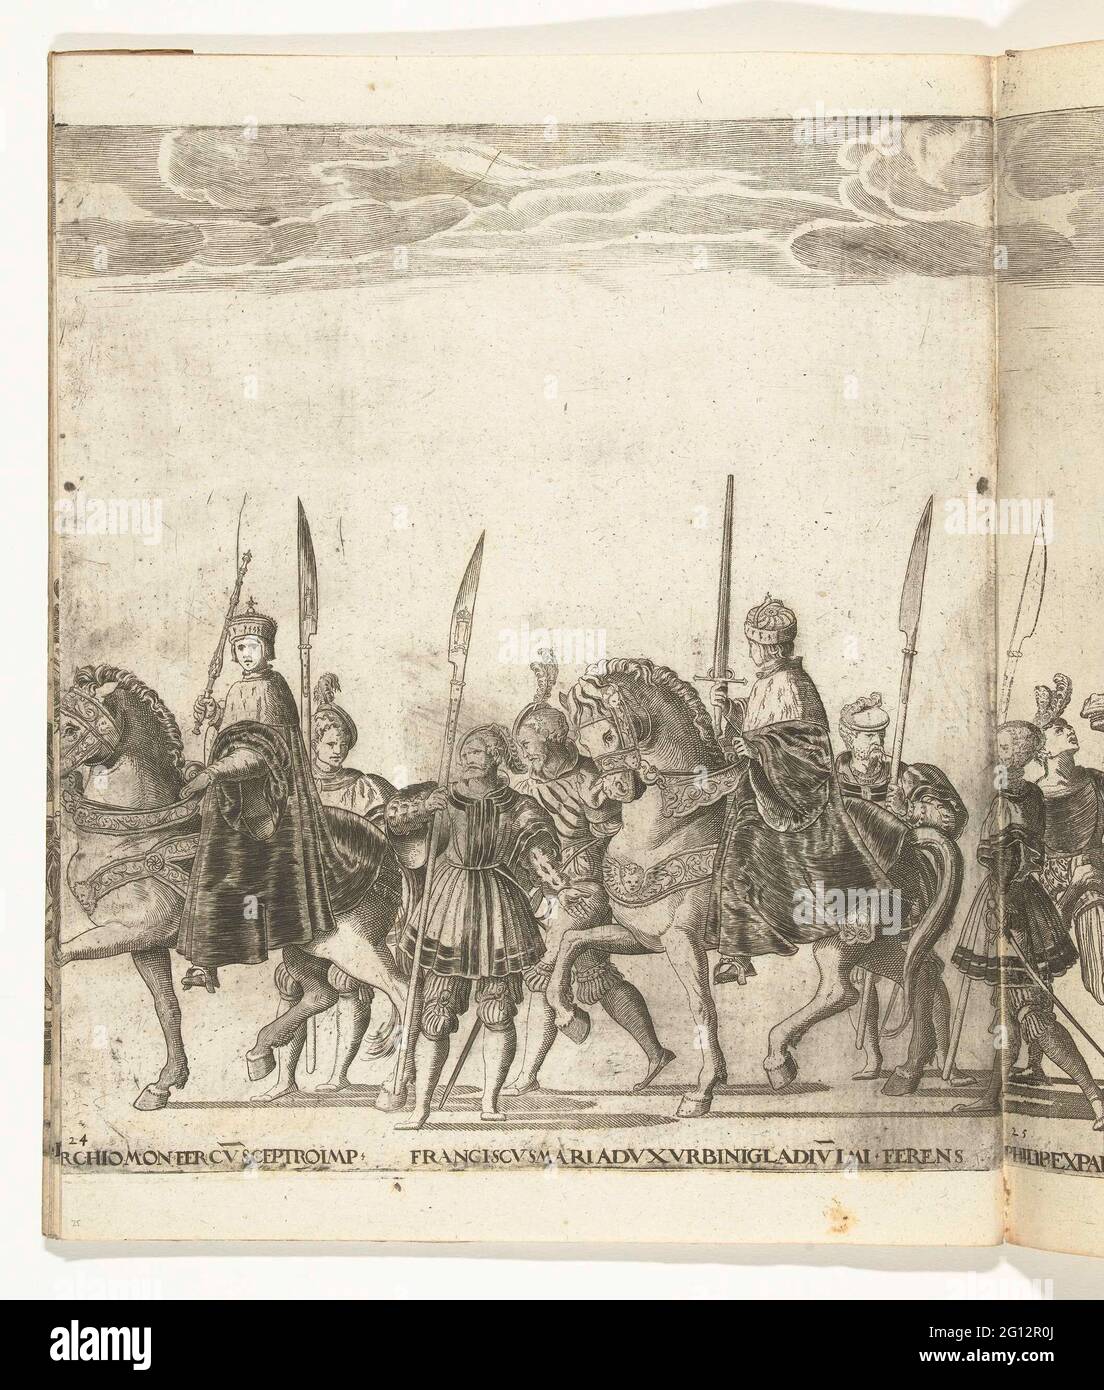 Boniface IV Paleologo, Markgraaf of Monferrato, with the imperial scepter and Francesco Maria della Rovere, Duke of Urbino, with the imperial sword, plate 24; Procession of Karel V with the Pope in Bologna after his coronation to Emperor, 1530. Bonifatius IV Paleologo, Markgraaf of Monferrato, with the imperial scepter and Francesco Maria della Rovere, Duke of Urbino, with the Imperial Sword, plate 24. Procession of Karel V With the Pope Clemens VII in Bologna after his coronation to Emperor, February 24, 1530. Stock Photo